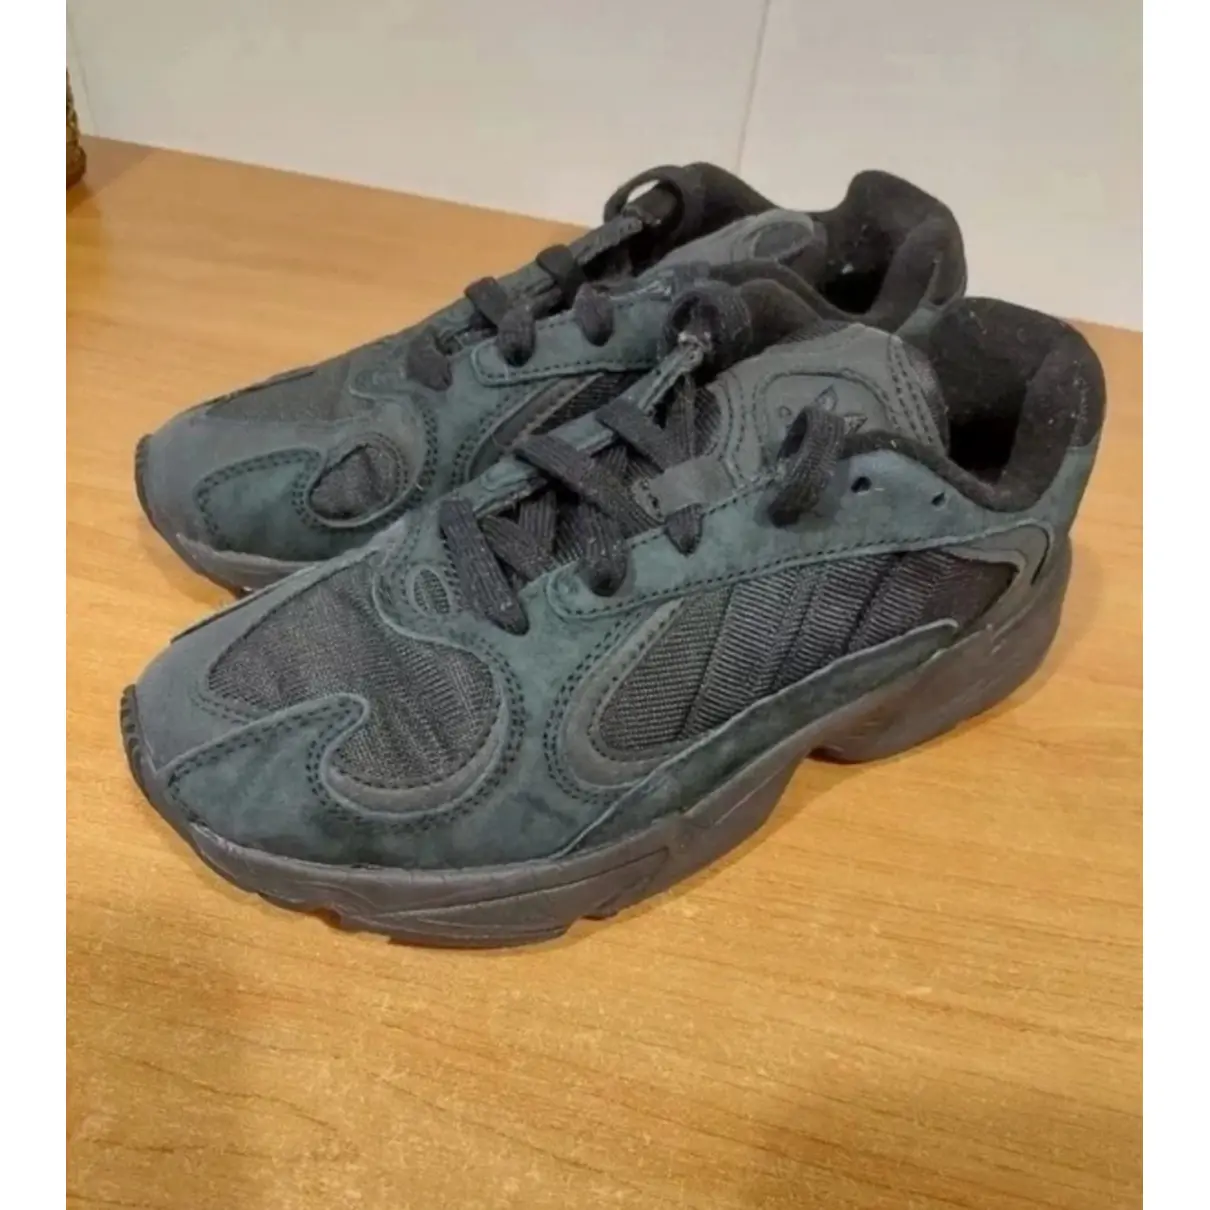 Buy Adidas Yung-1 trainers online